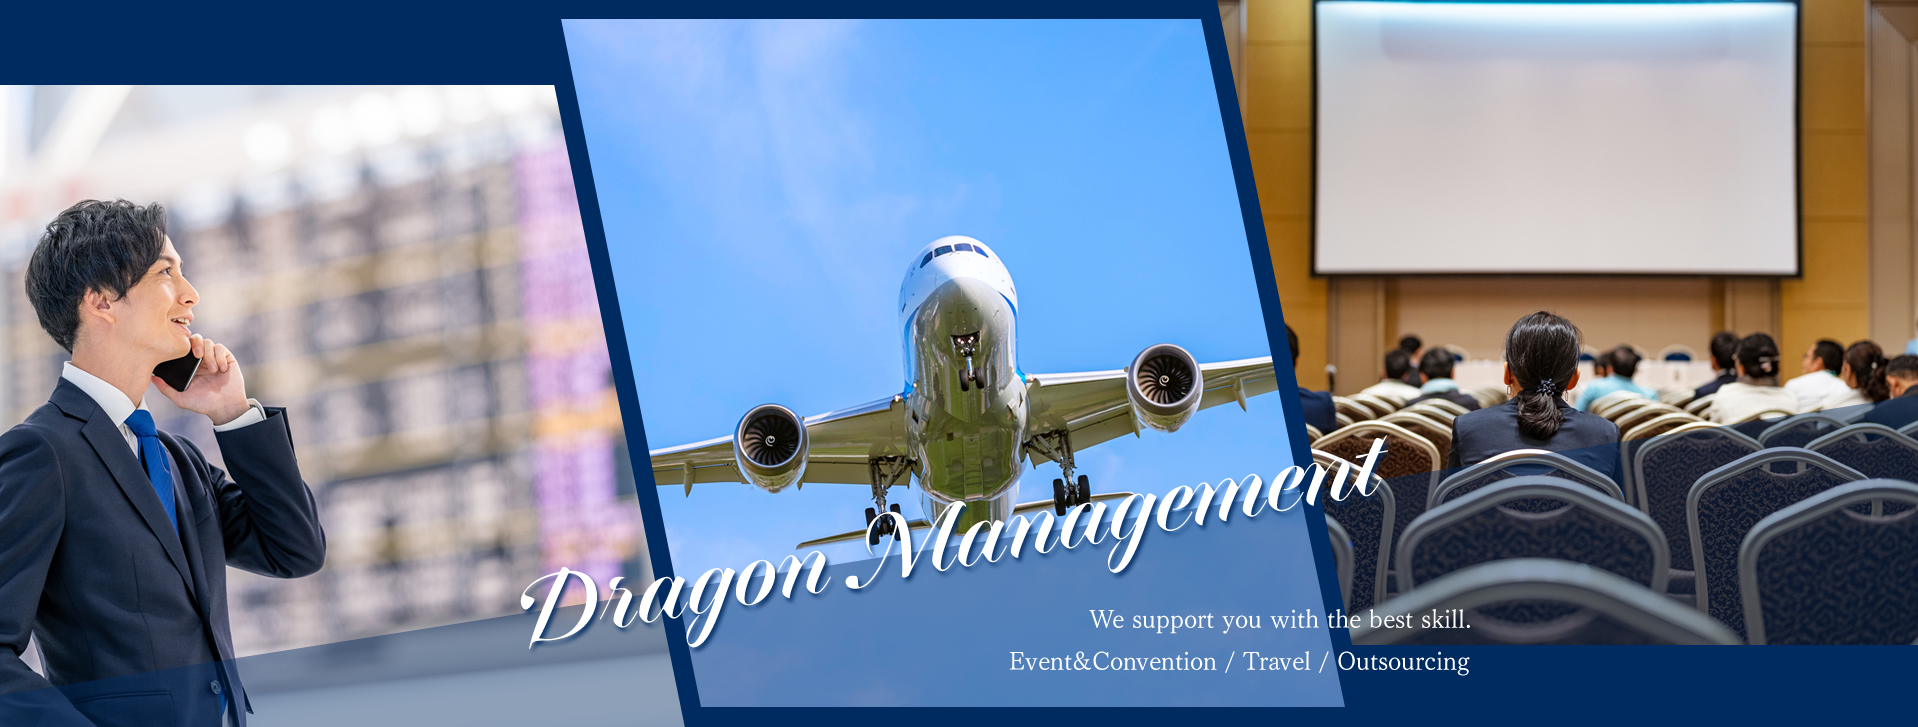 Dragon Management We support you with the best skill. Event&Convention / Travel / Outsourcing